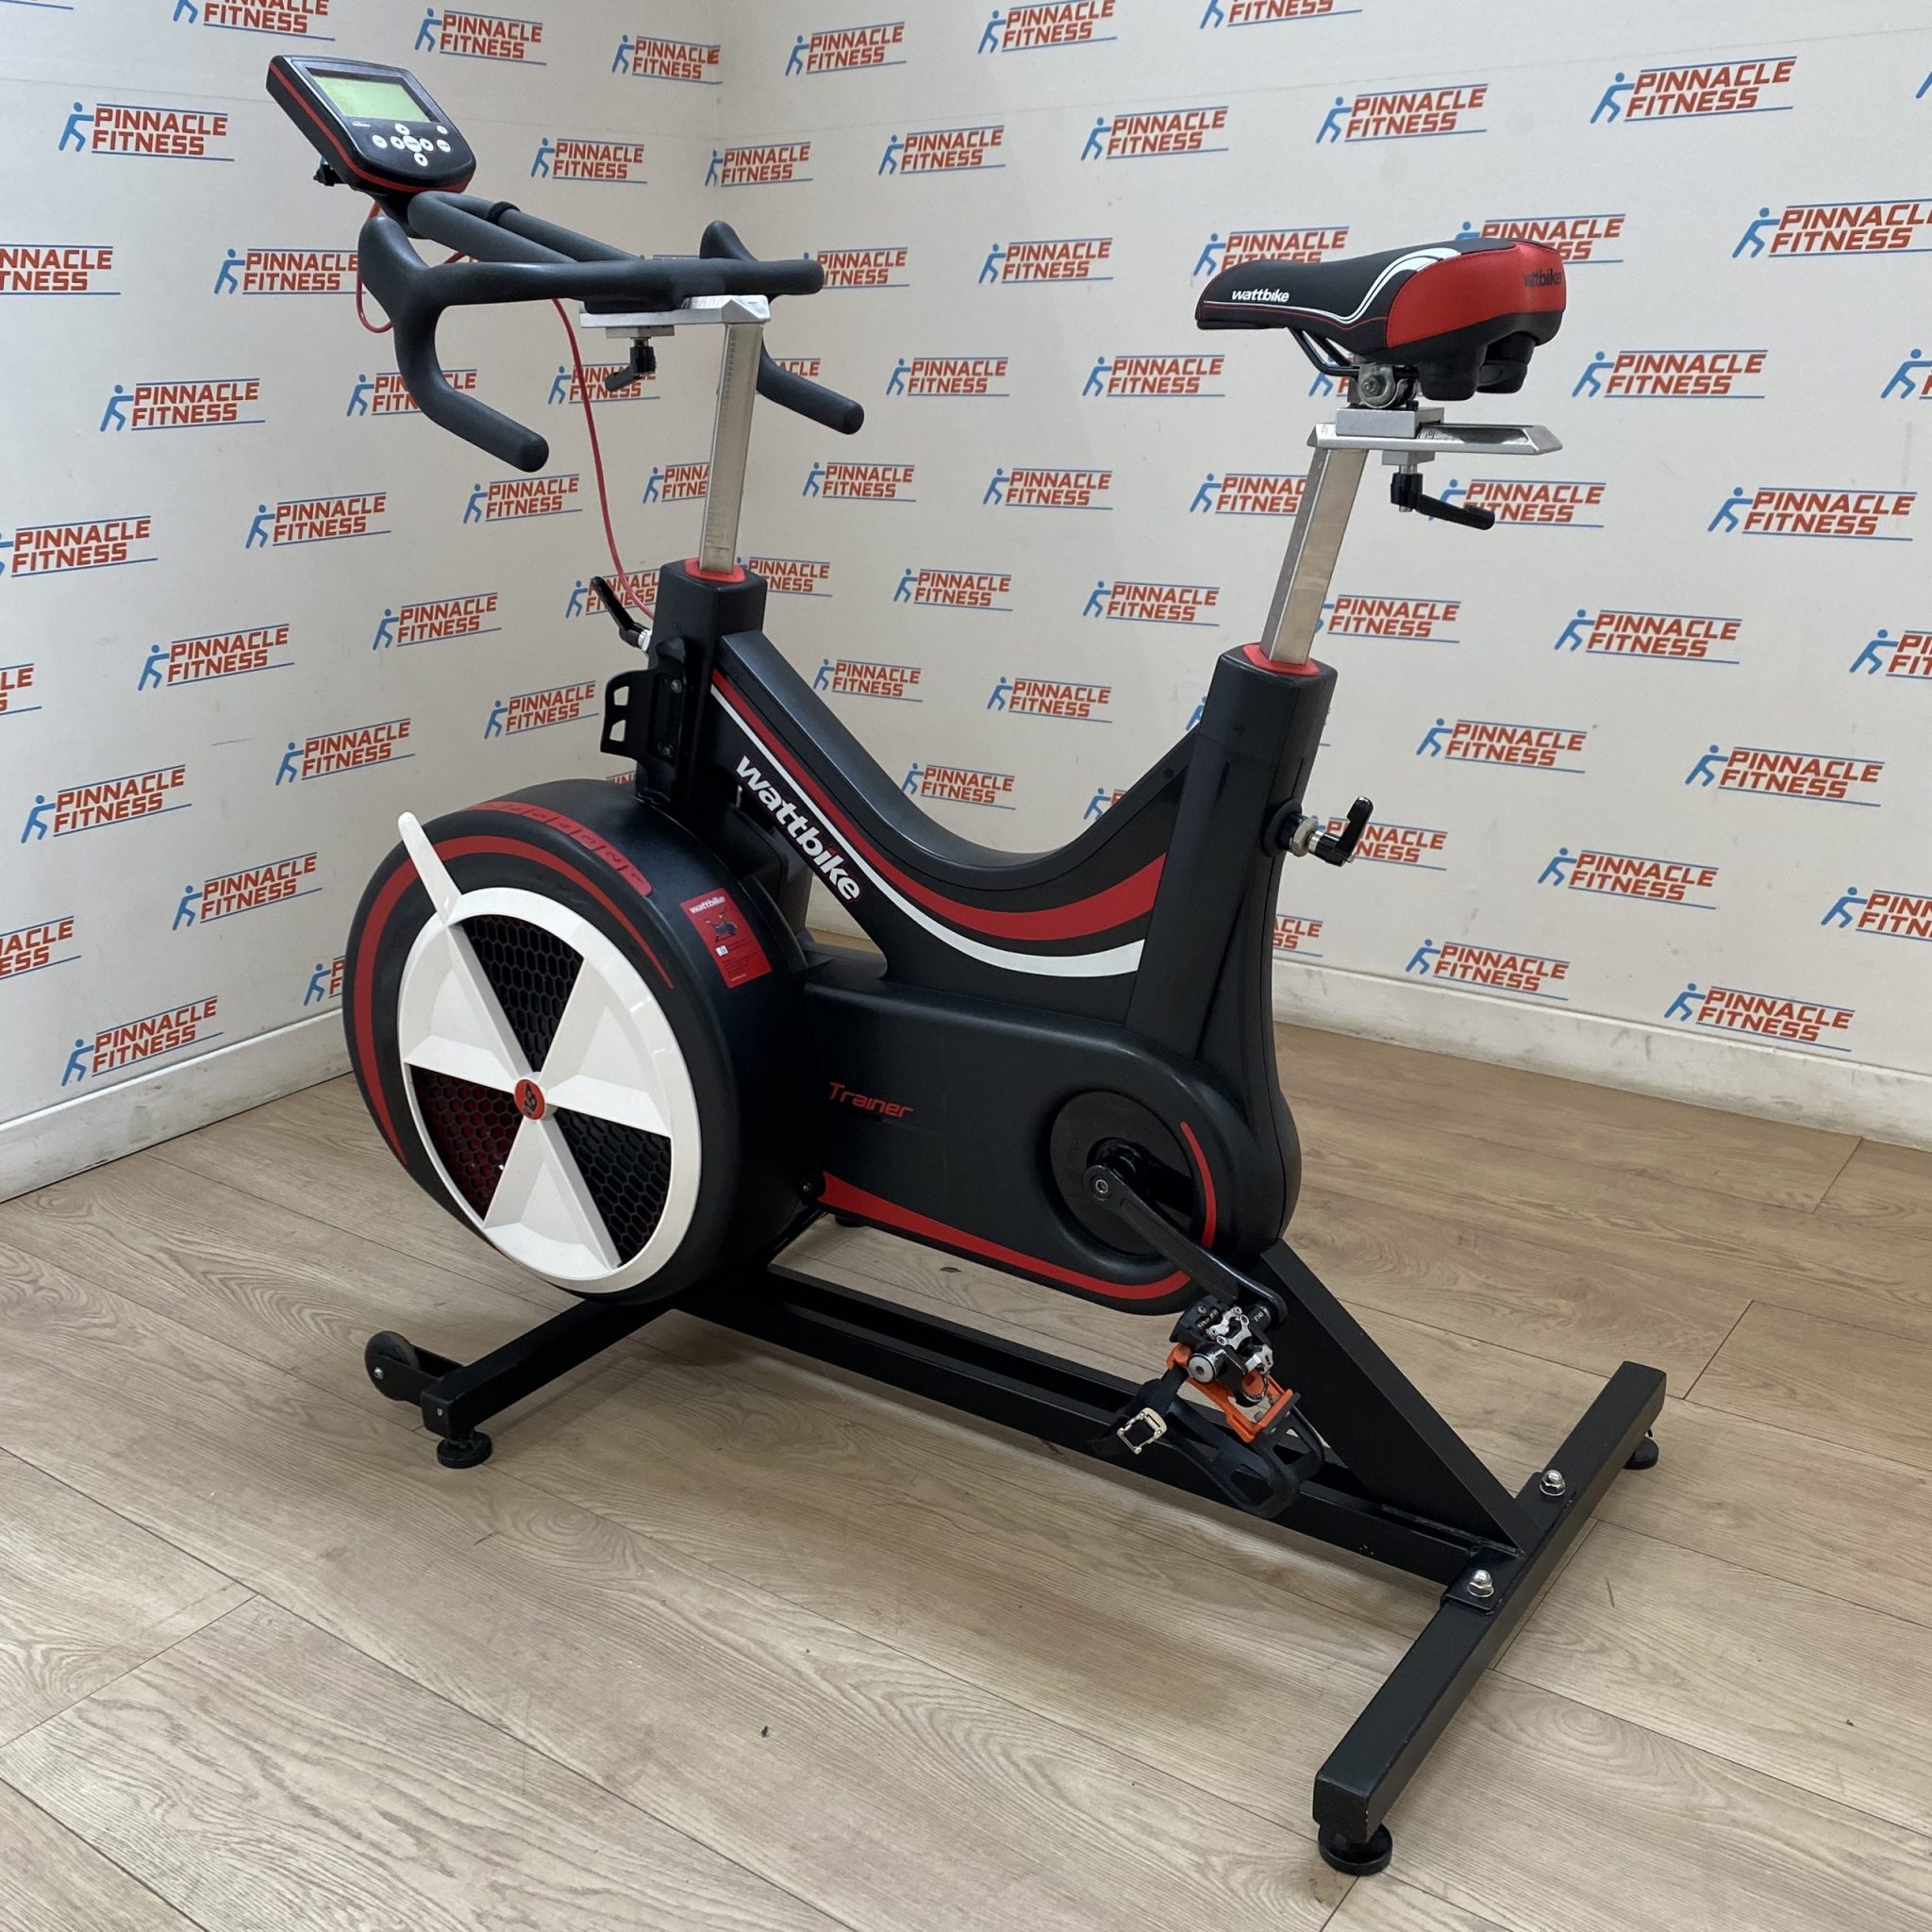 Wattbike Trainer Model B with Bluetooth Console - Pinnacle Fitness